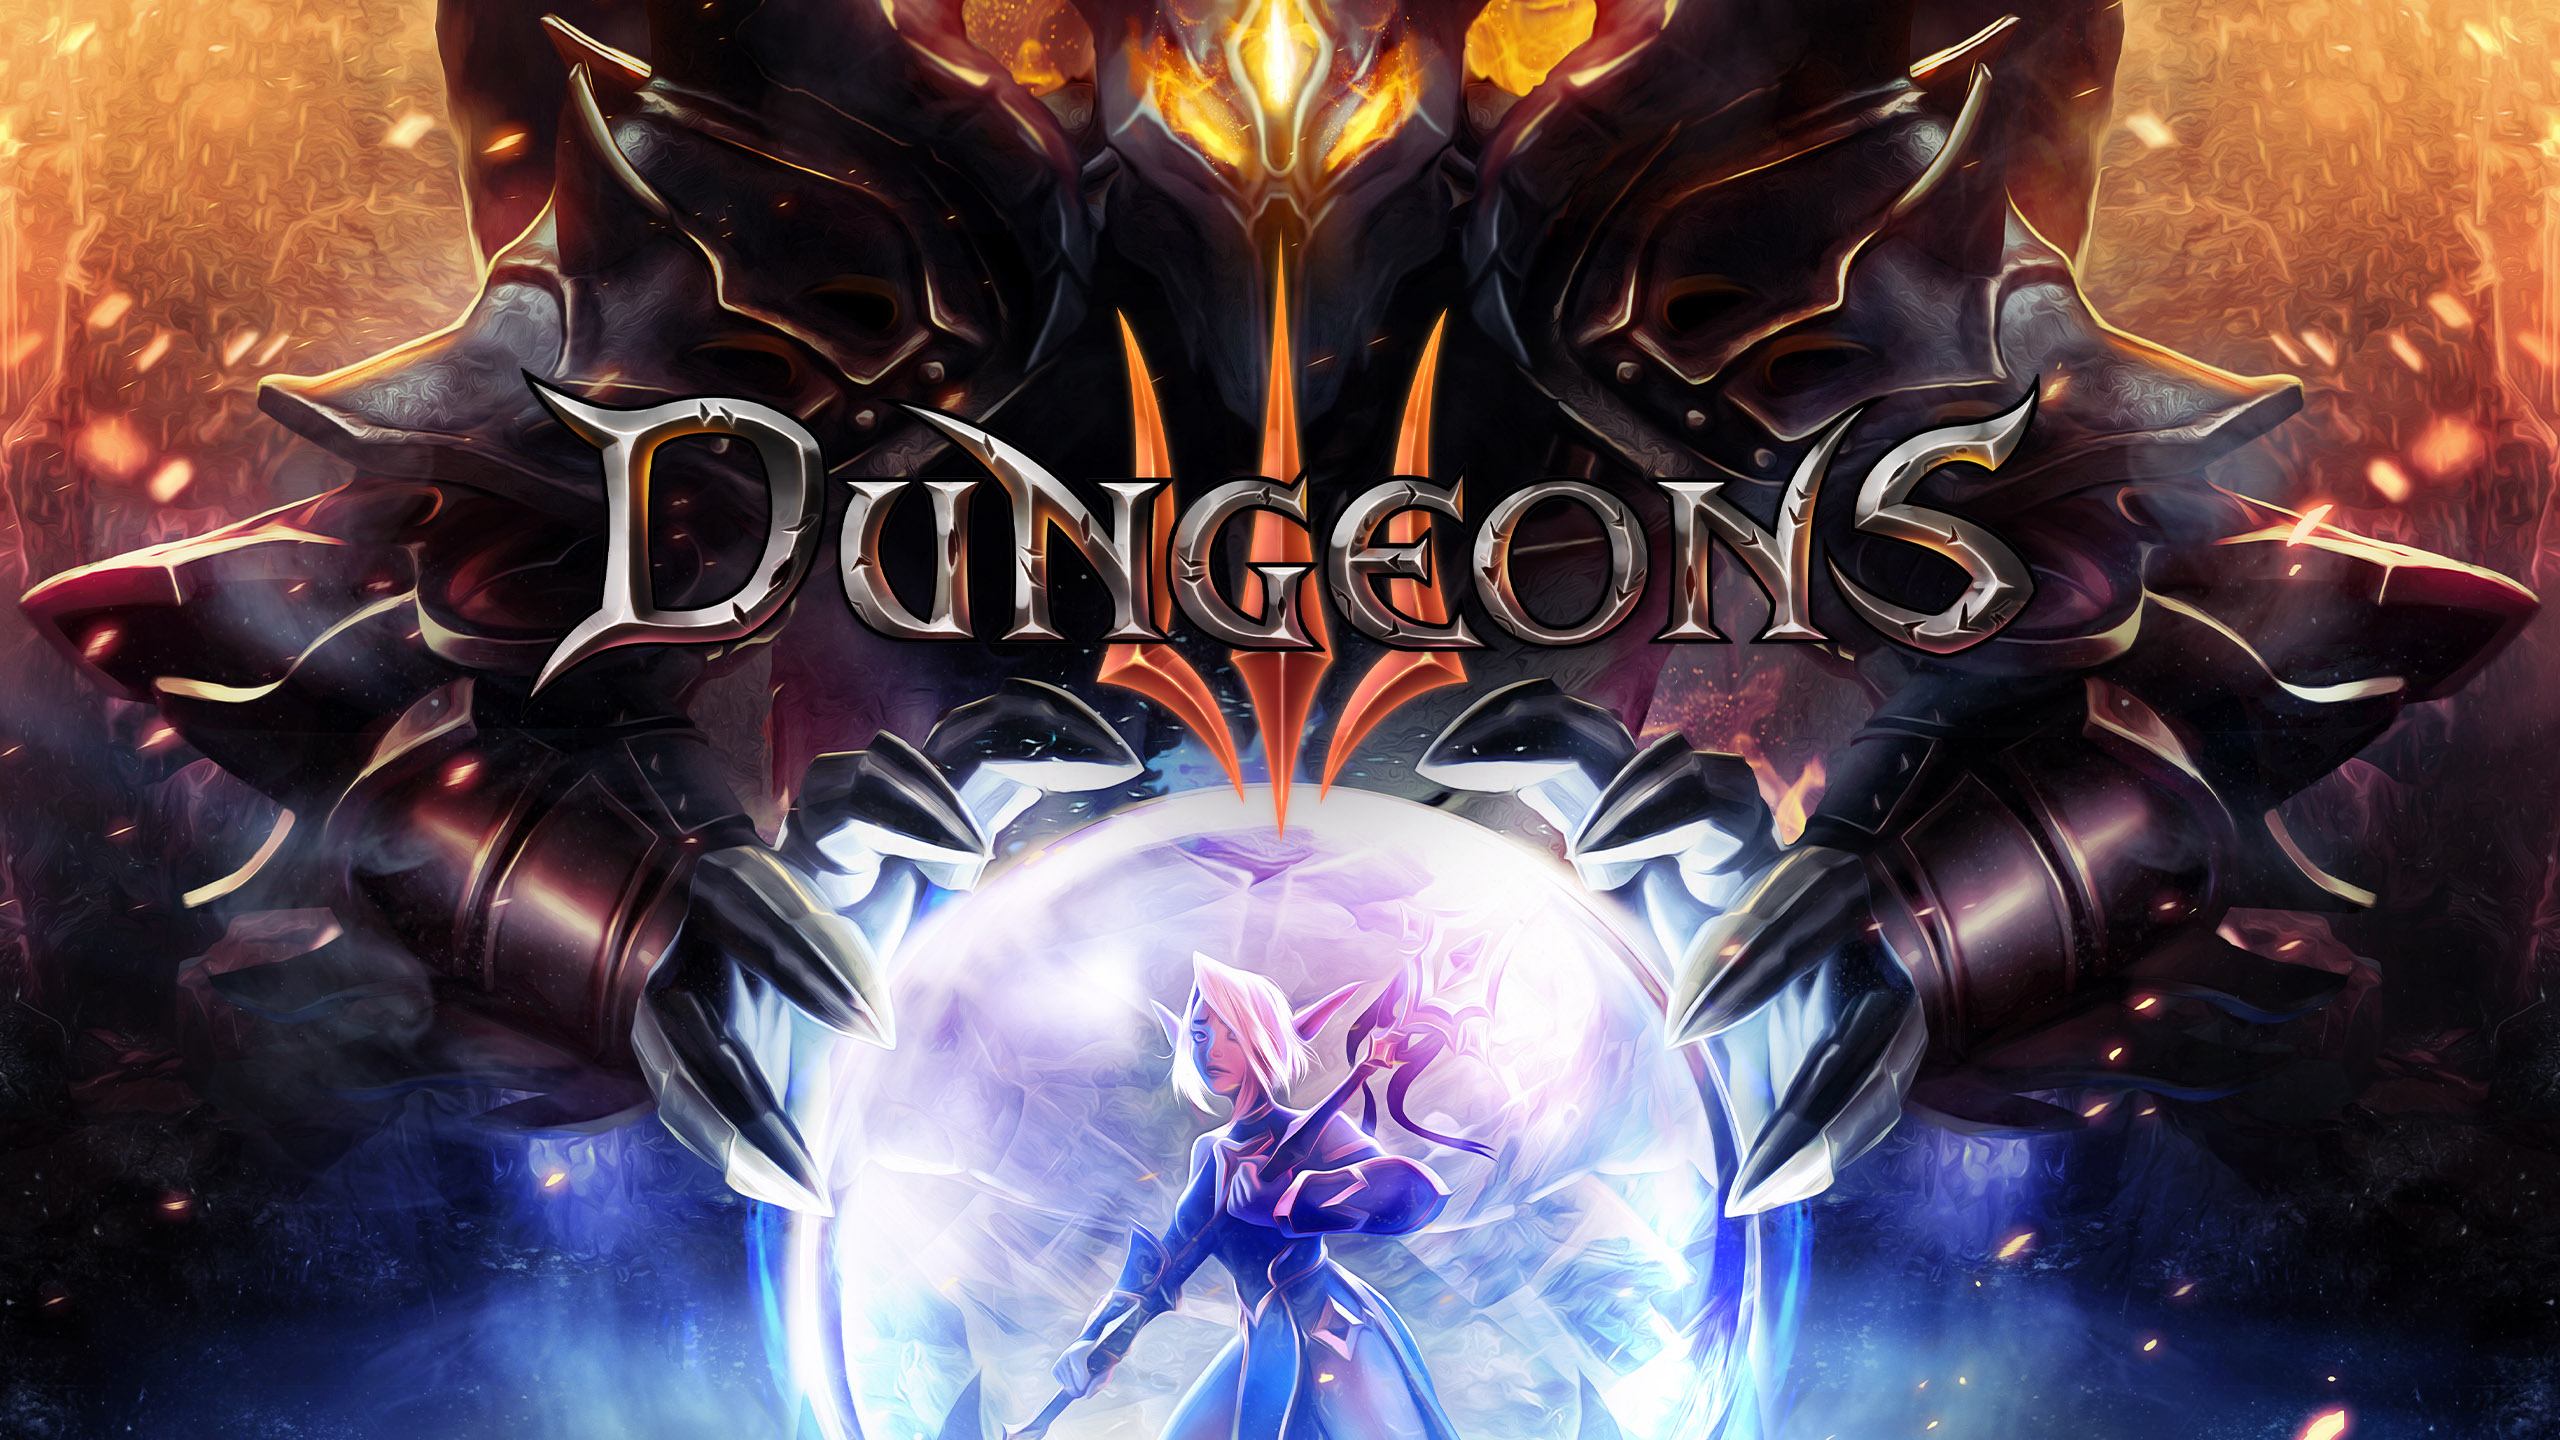 EGS Dungeons3 RealmforgeStudios S3 2560x1440 21b5fe0f44bc1f4c23a68bf6e159be40